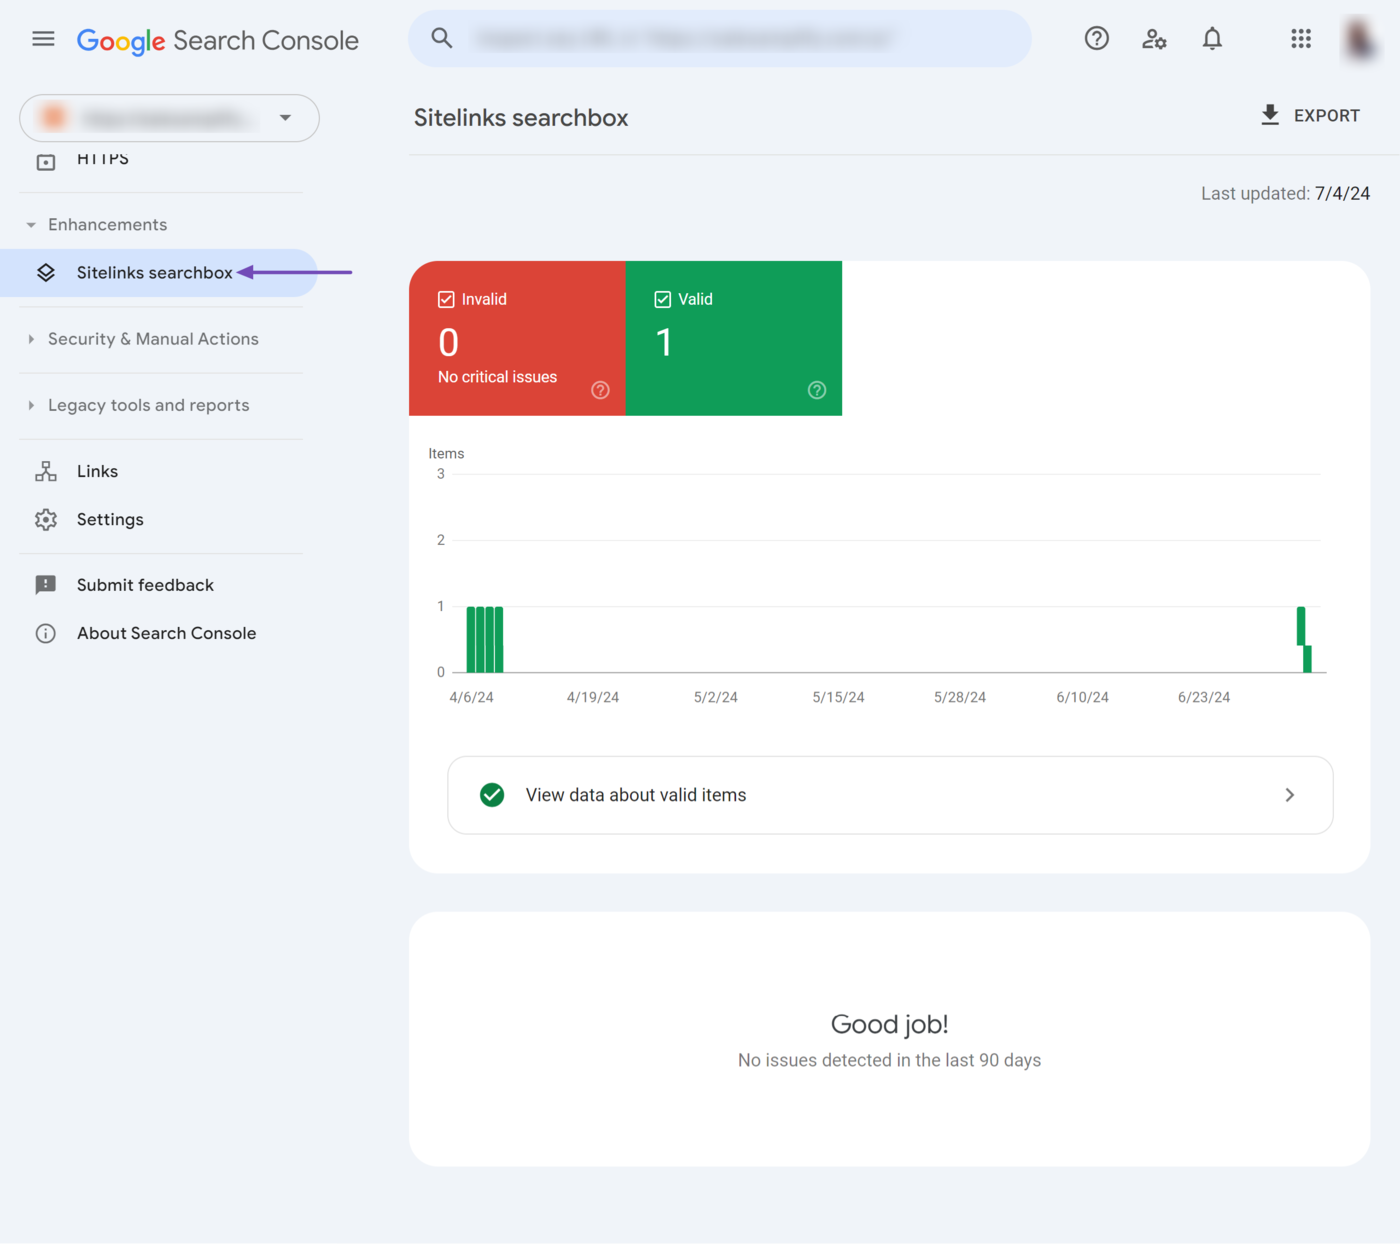 Overview of the Sitelinks searchbox report in Google Search Console